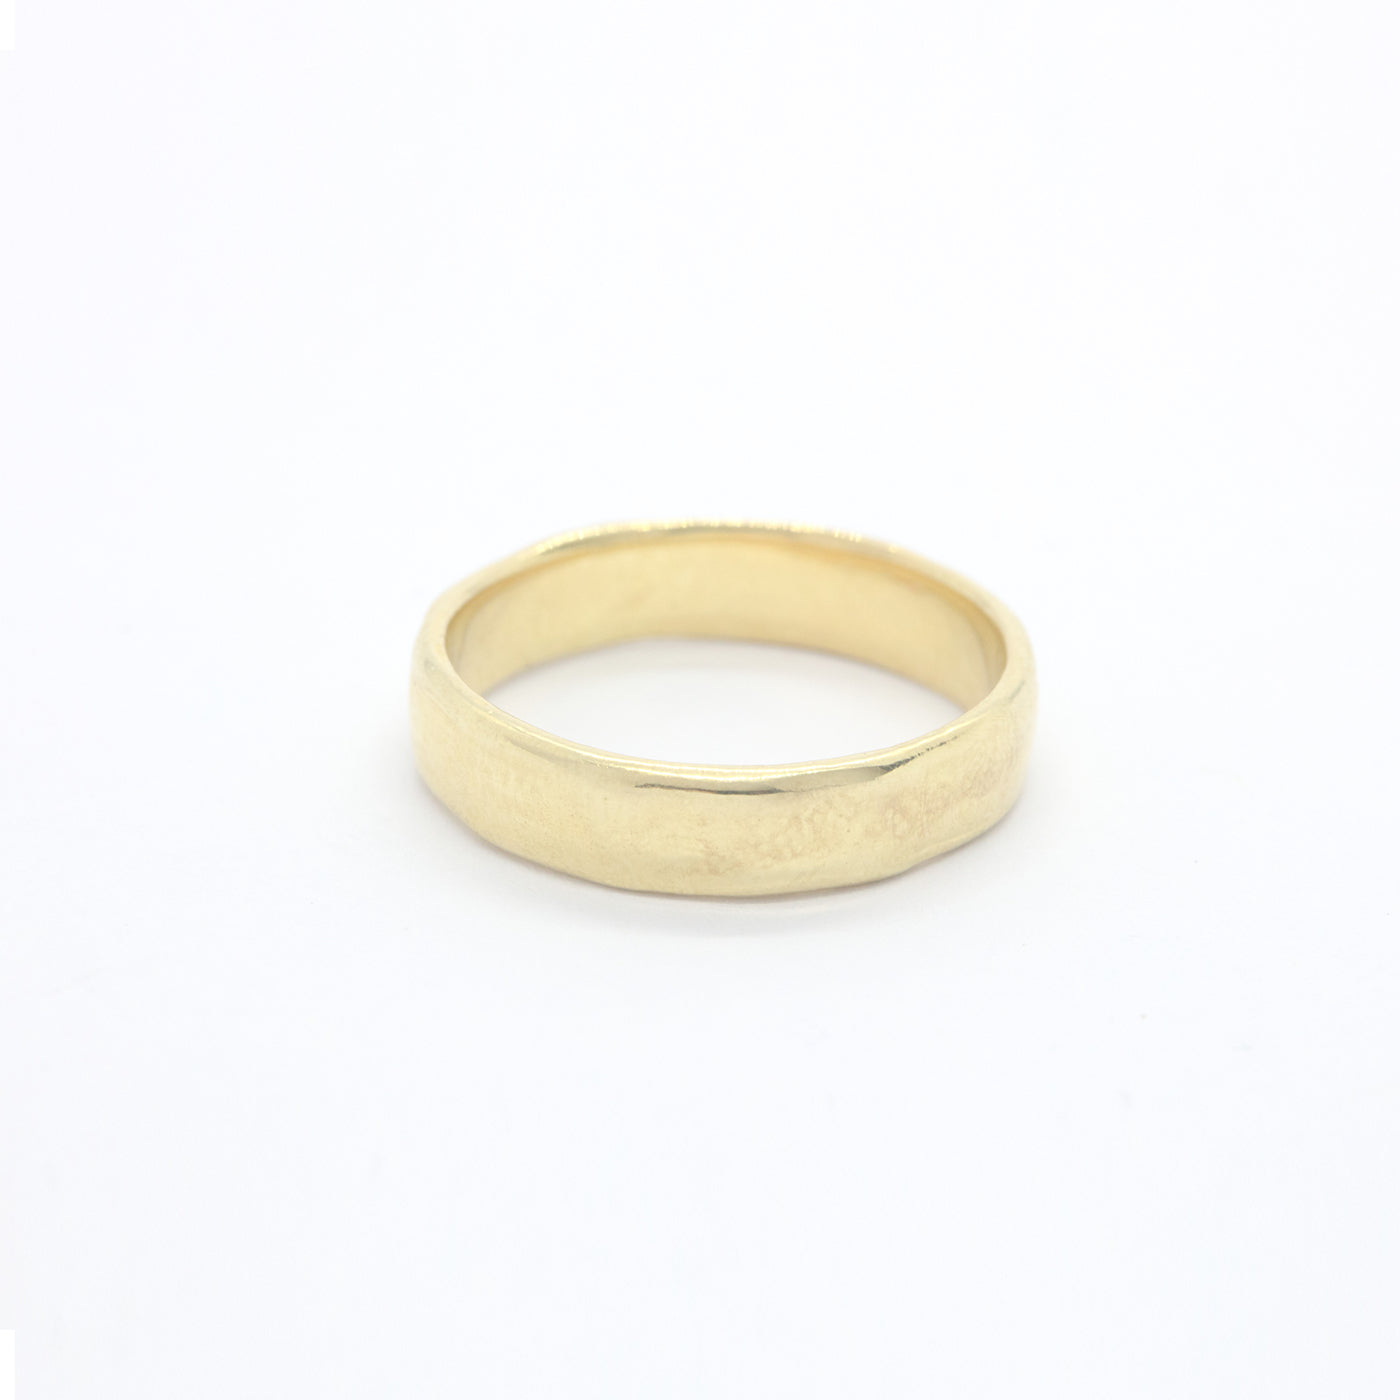 Ring Calliope Wedding Band for Him 14ct or 18ct yellow gold product view innan jewellery independent atelier berlin